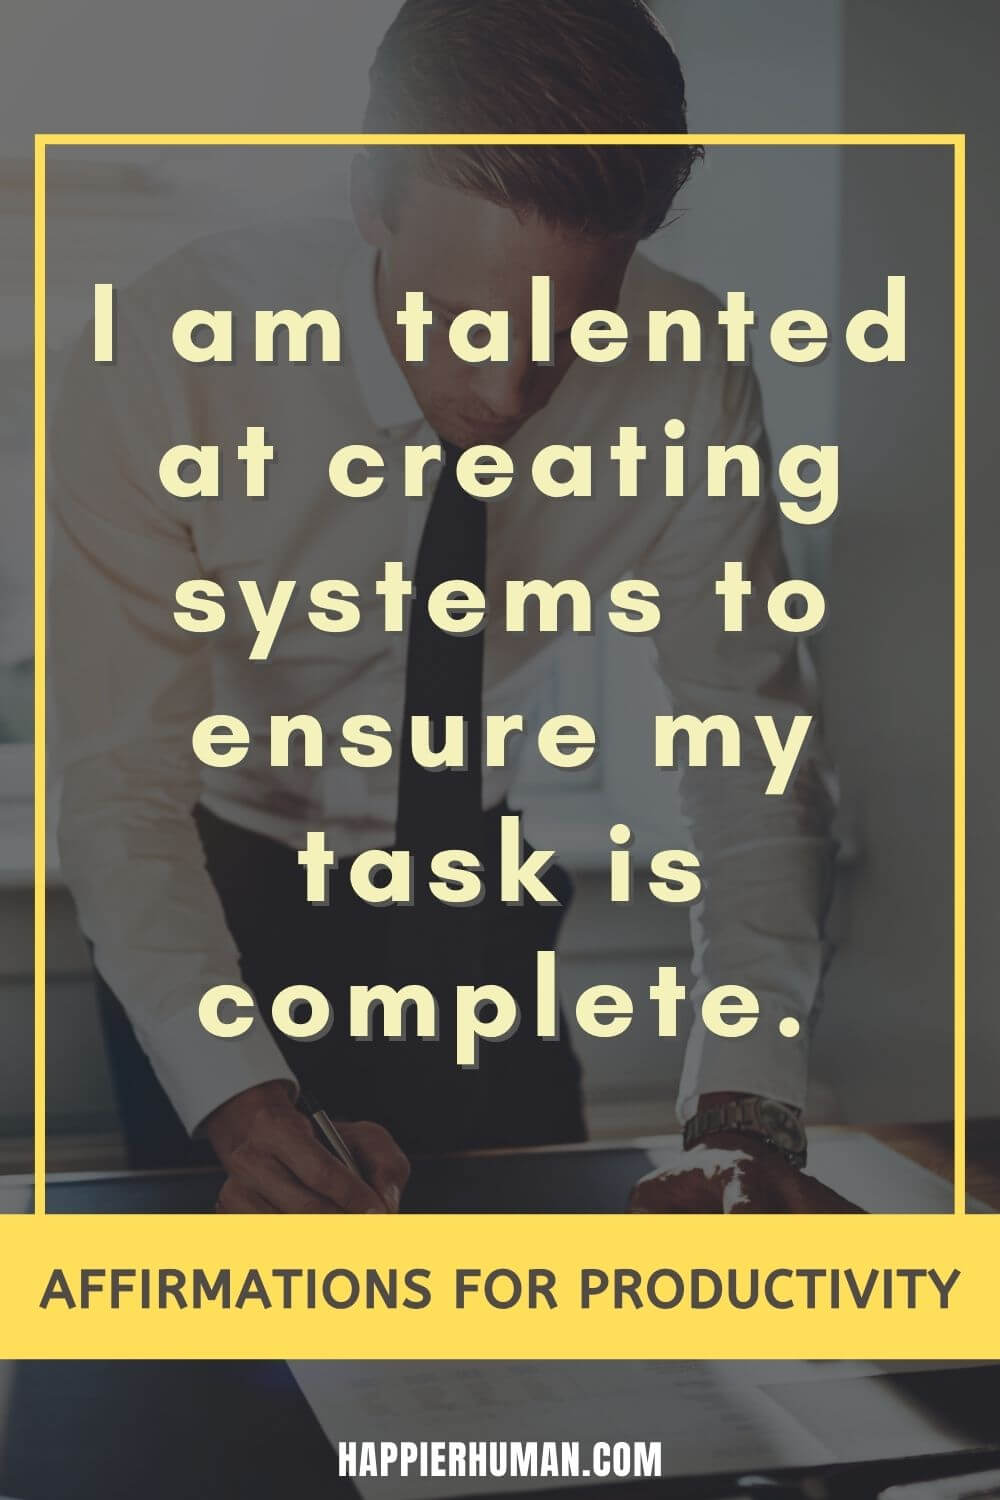 Affirmations for Productivity - I am talented at creating systems to ensure my task is complete. | positive affirmations for getting things done | affirmations for efficiency | affirmations for confidence